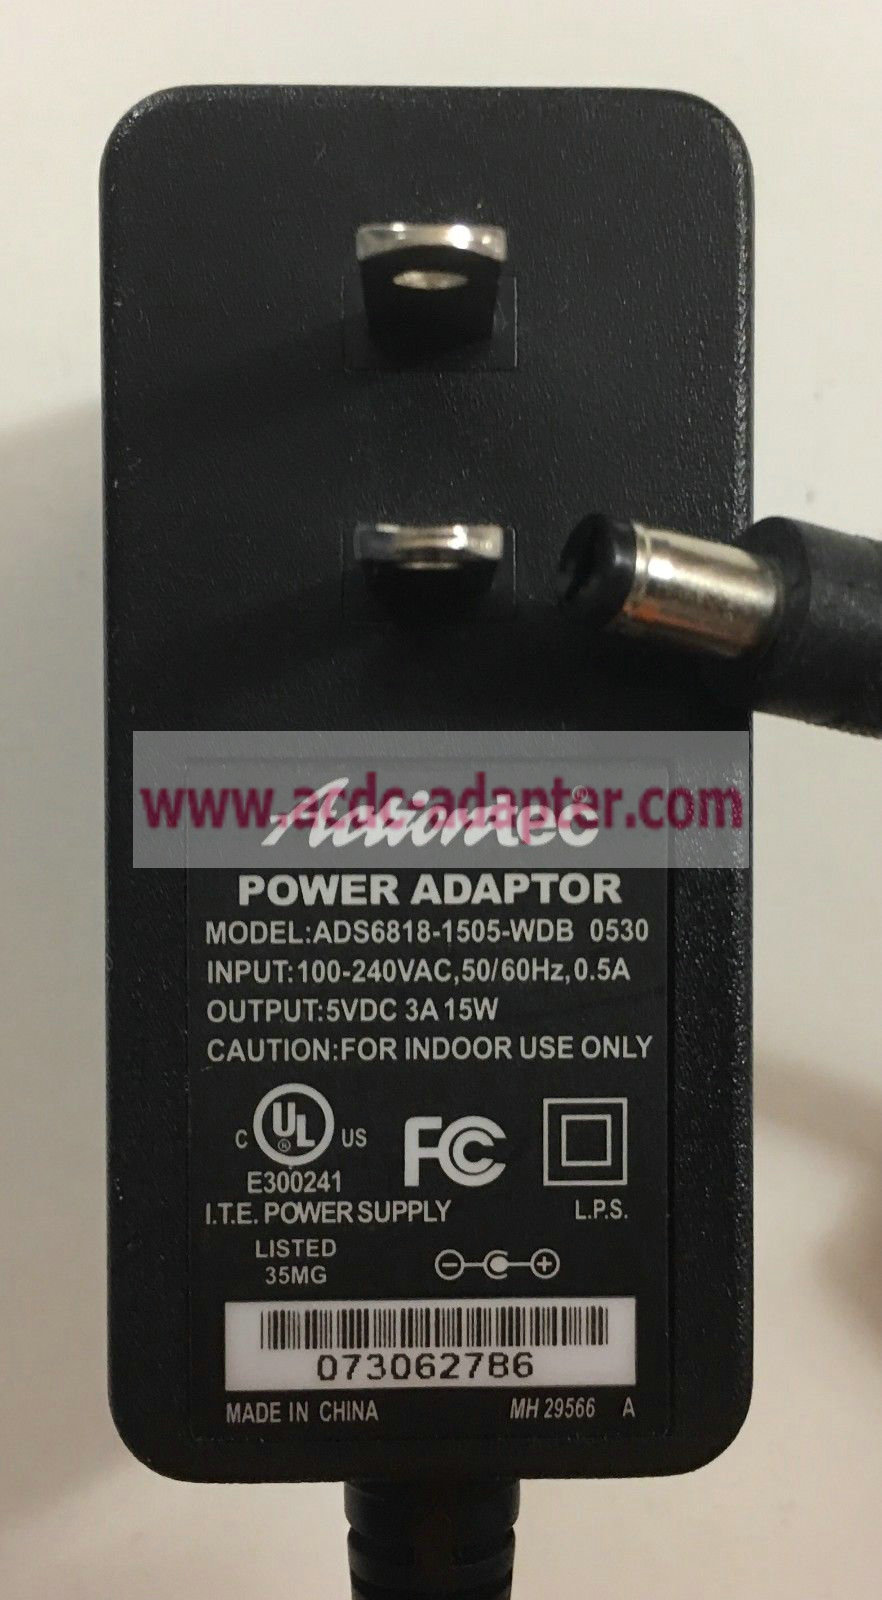 Brand new Actiontec 5VDC 3A 15W ADS6818-1505-WD Power Adapter for MI424WR Verizon